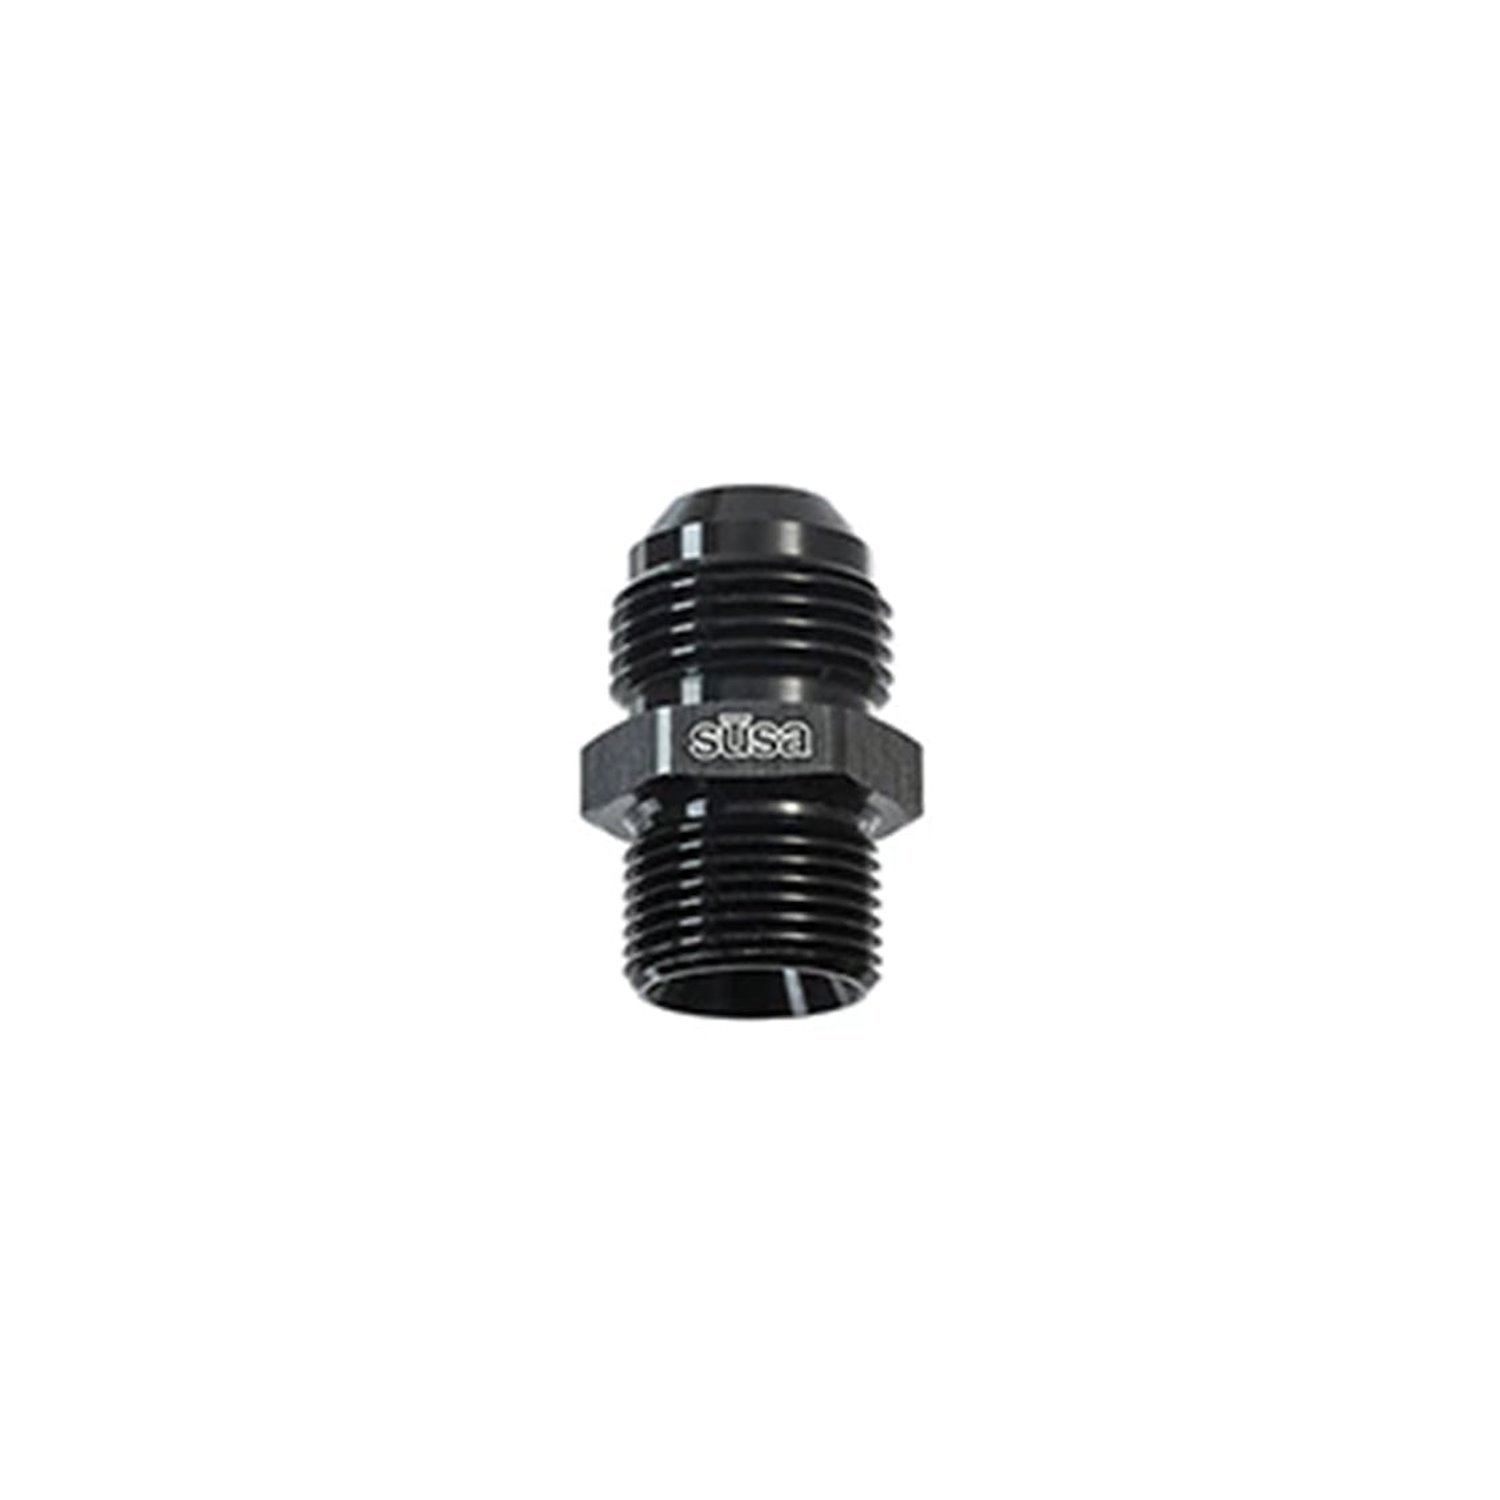 22-M18AN08-00 Adapter Fitting, M18 Male to AN08 Male, Straight